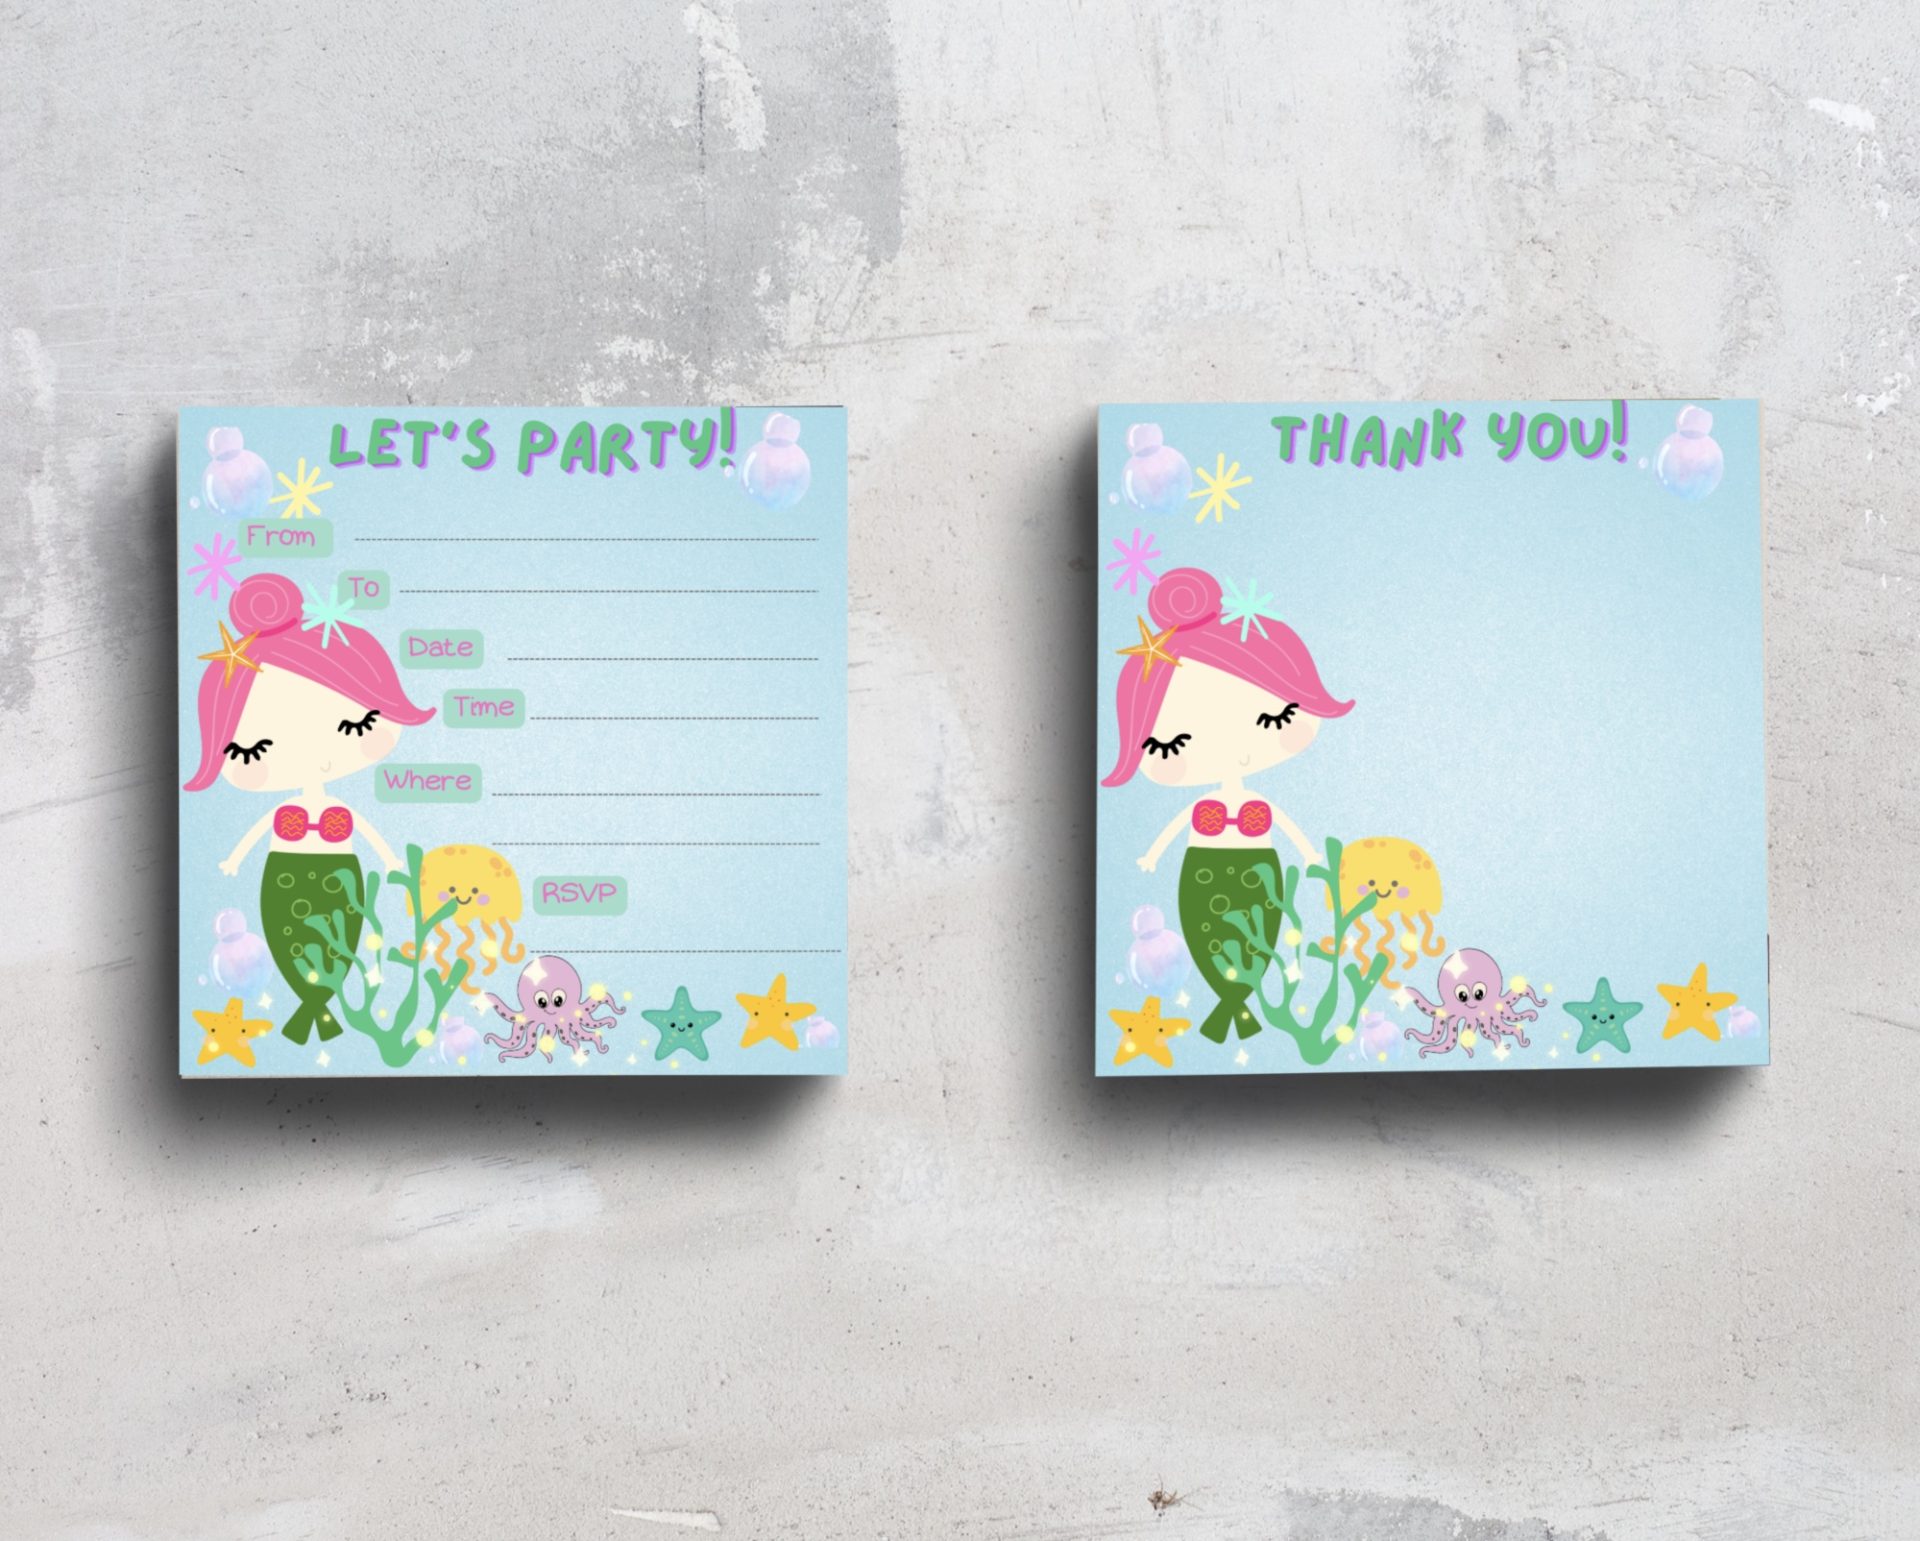 Thank you cards + invitations